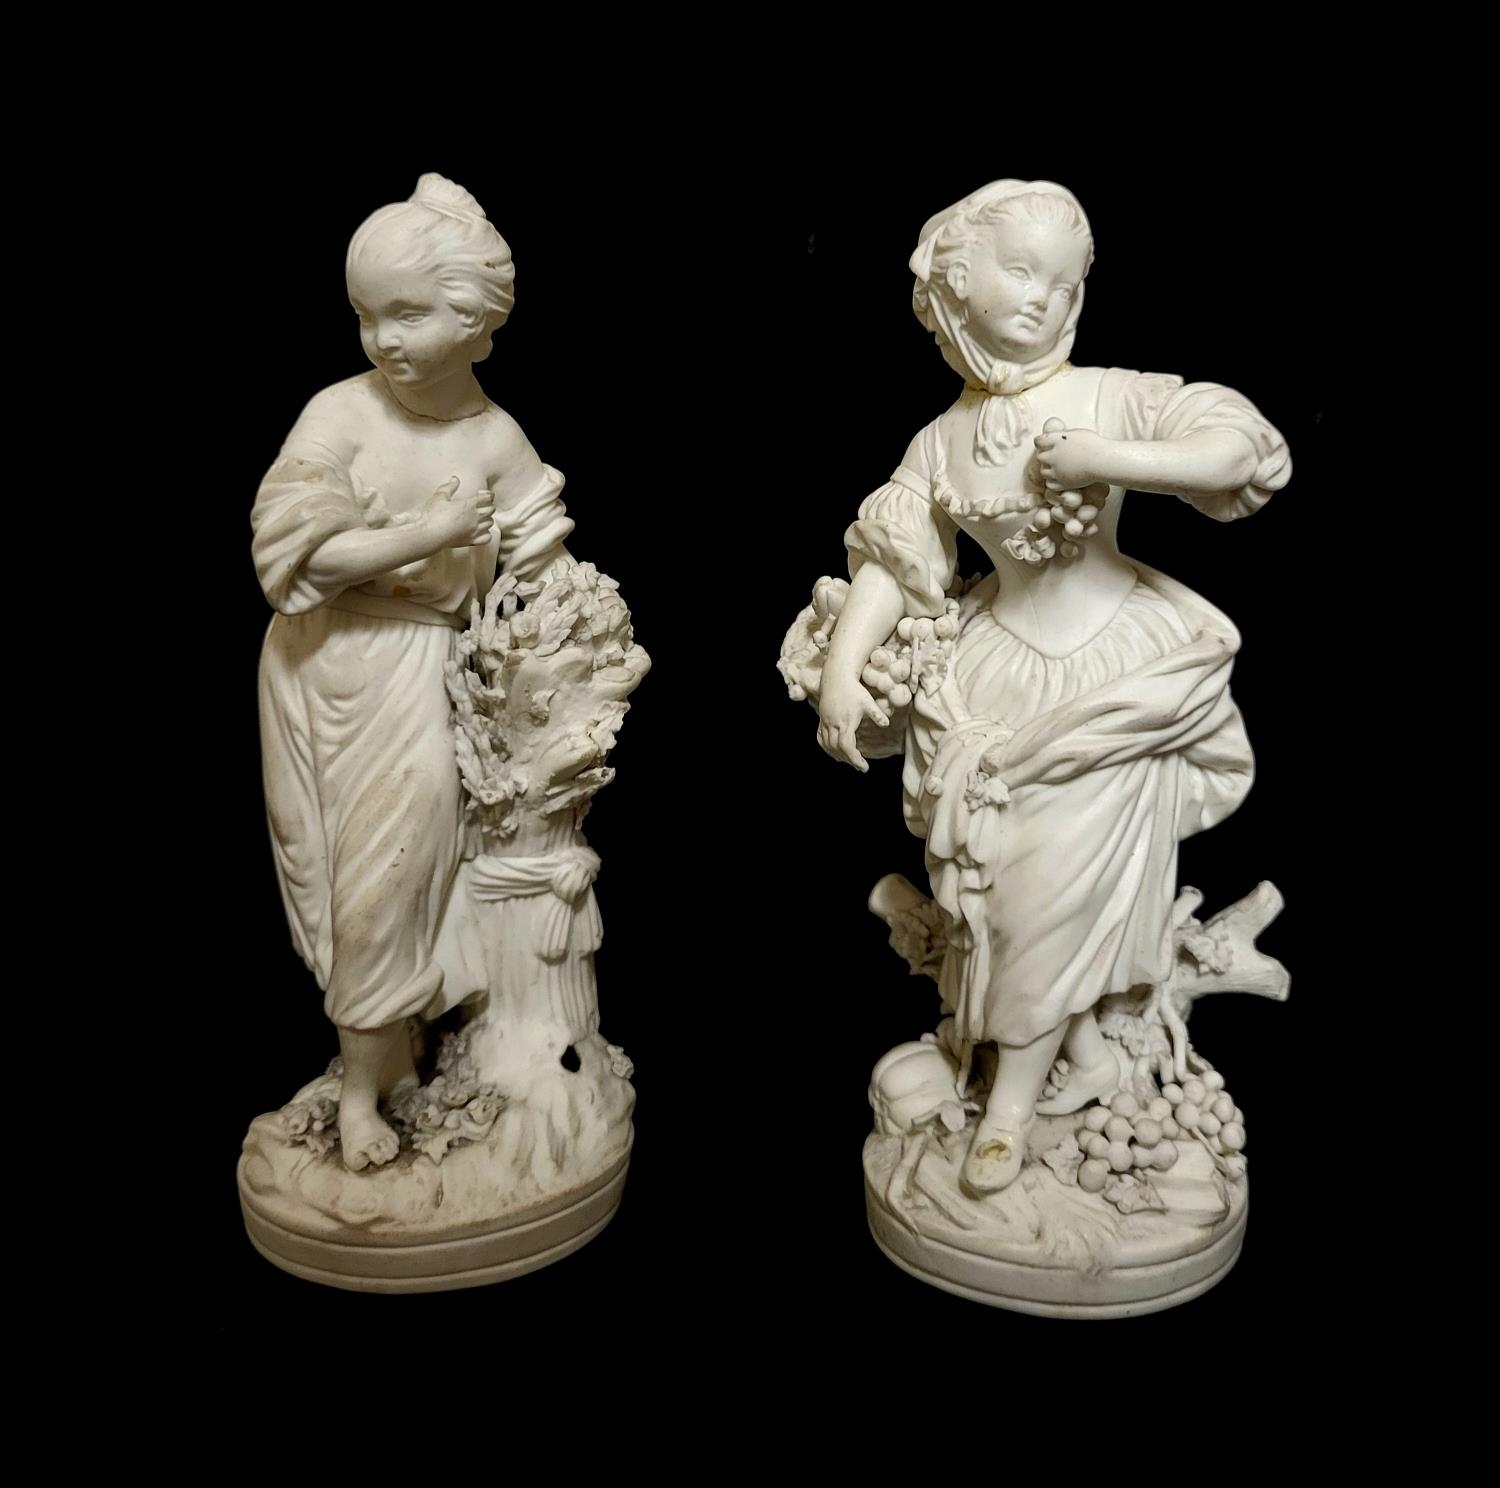 A PAIR OF EARLY 19TH CENTURY DERBY BLANC DE CHINE PORCELAIN FIGURES Female characters wearing period - Image 3 of 11